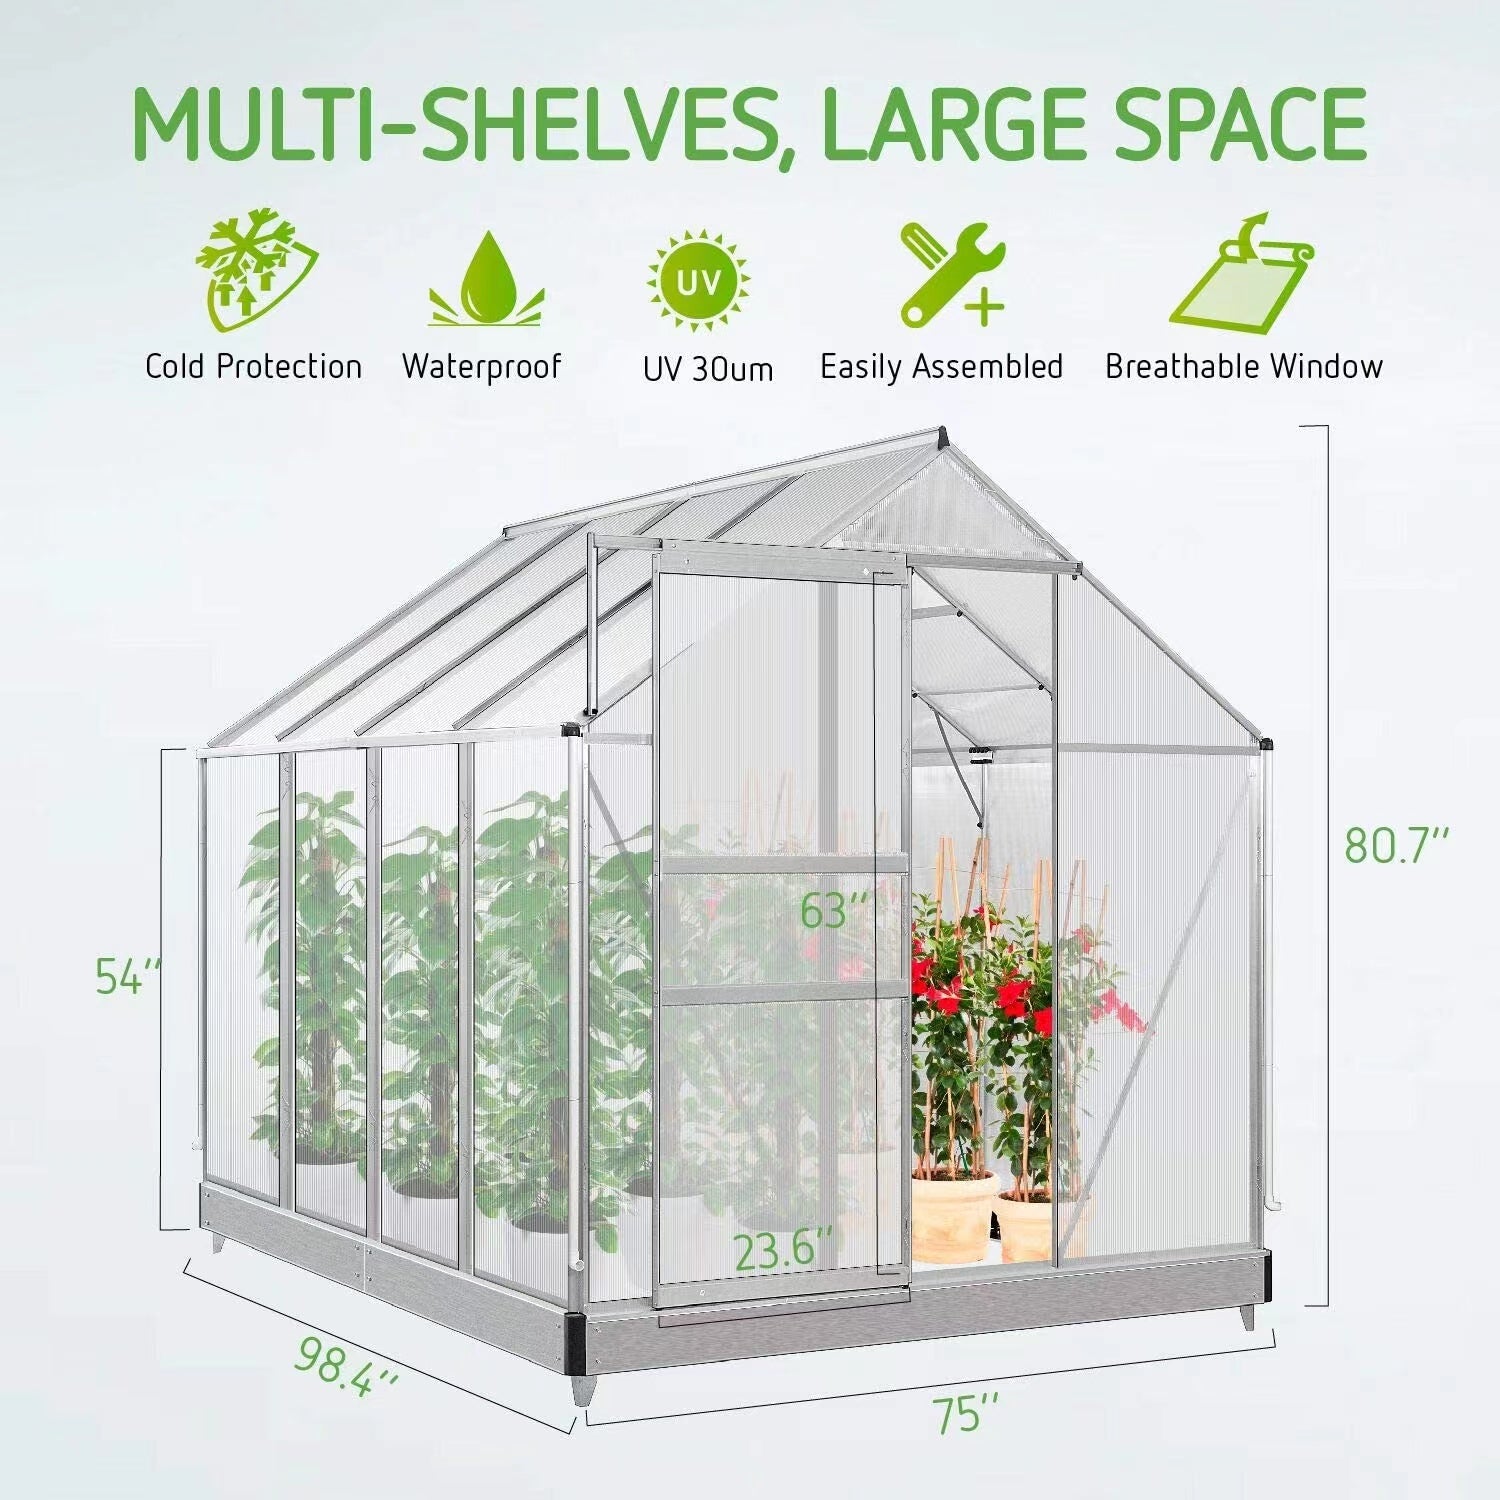 [KGORGE Plus] 8.3' x 6.3' x 6.8' Aluminum Outdoor Greenhouse, Polycarbonate Walk-in Garden Greenhouse Kit with Adjustable Roof Vent, Rain Gutter and Sliding Door for Winter